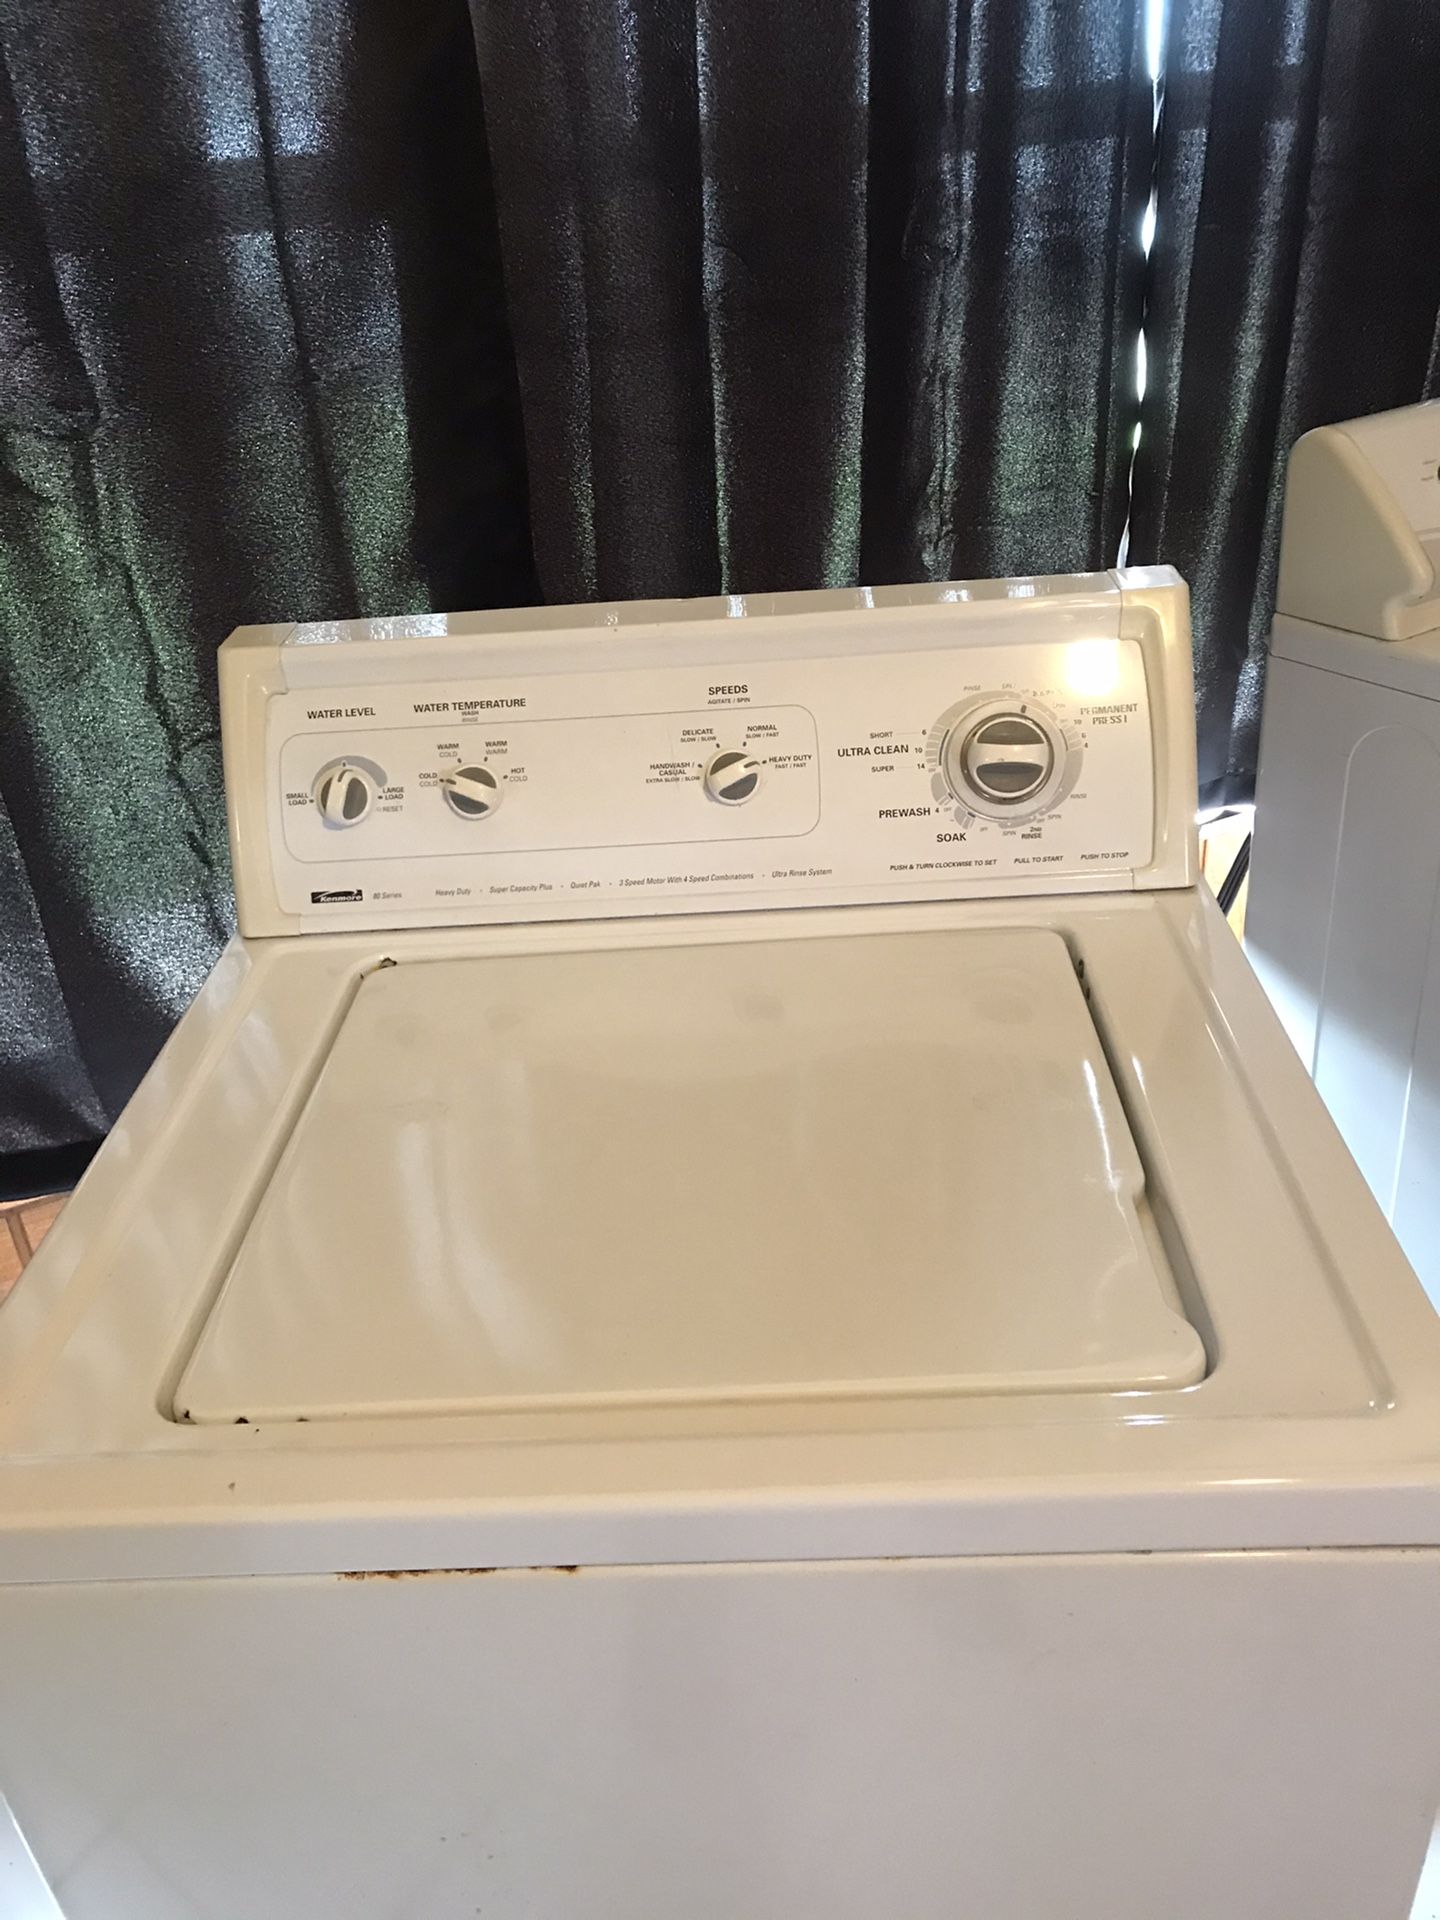 Kenmore 80 series washer and Maytag dryer